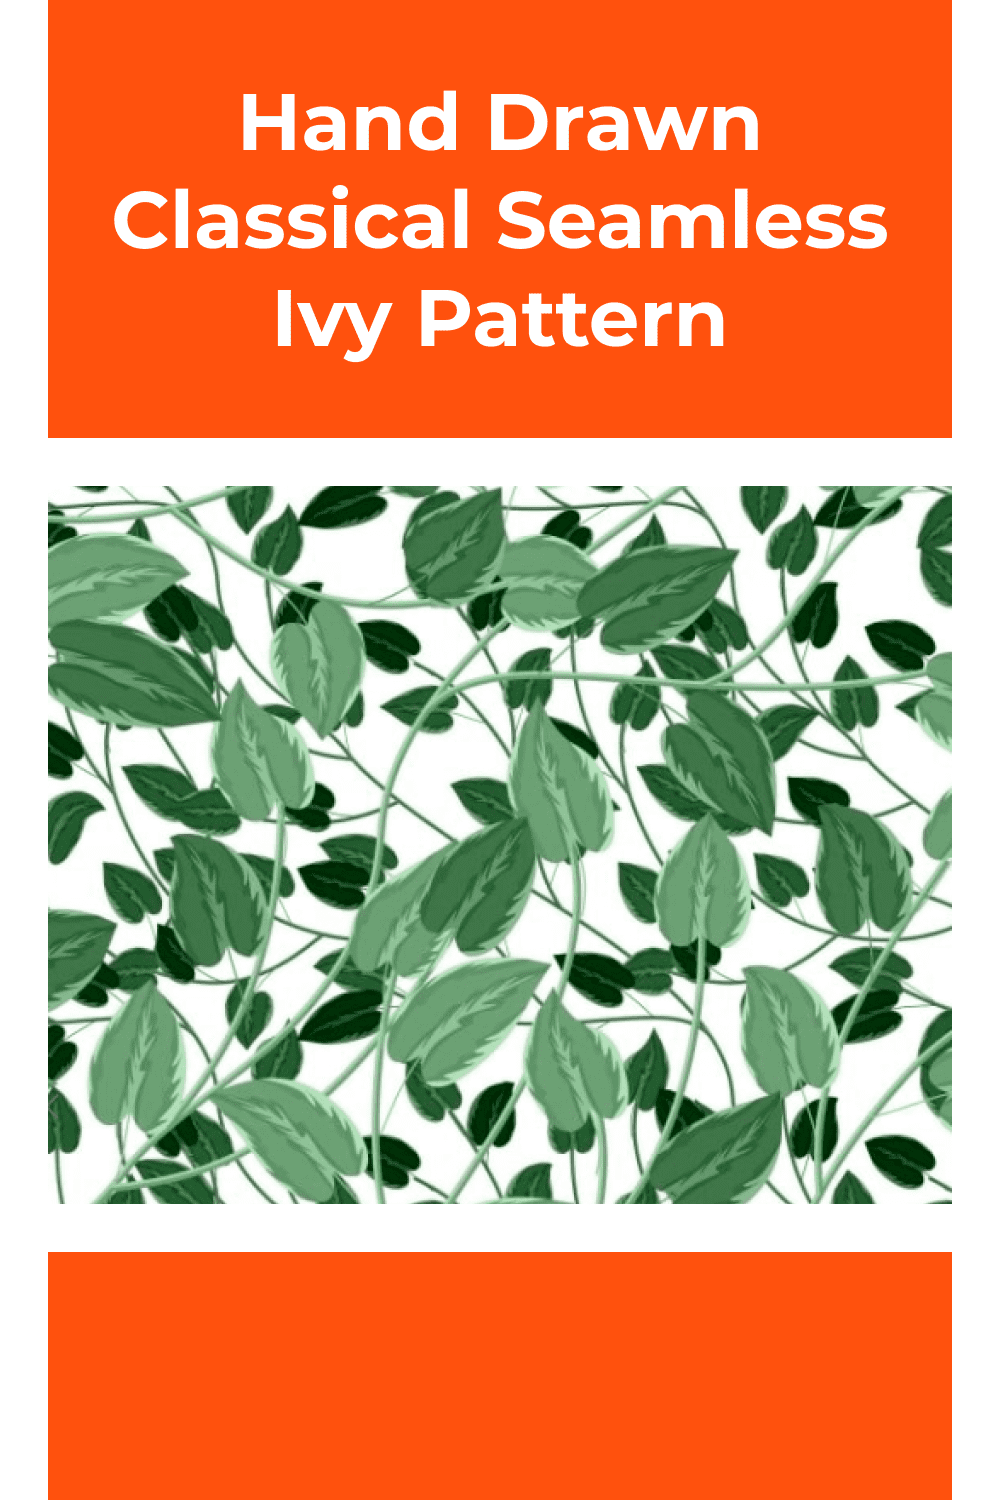 Hand drawn classical ivy leaves.